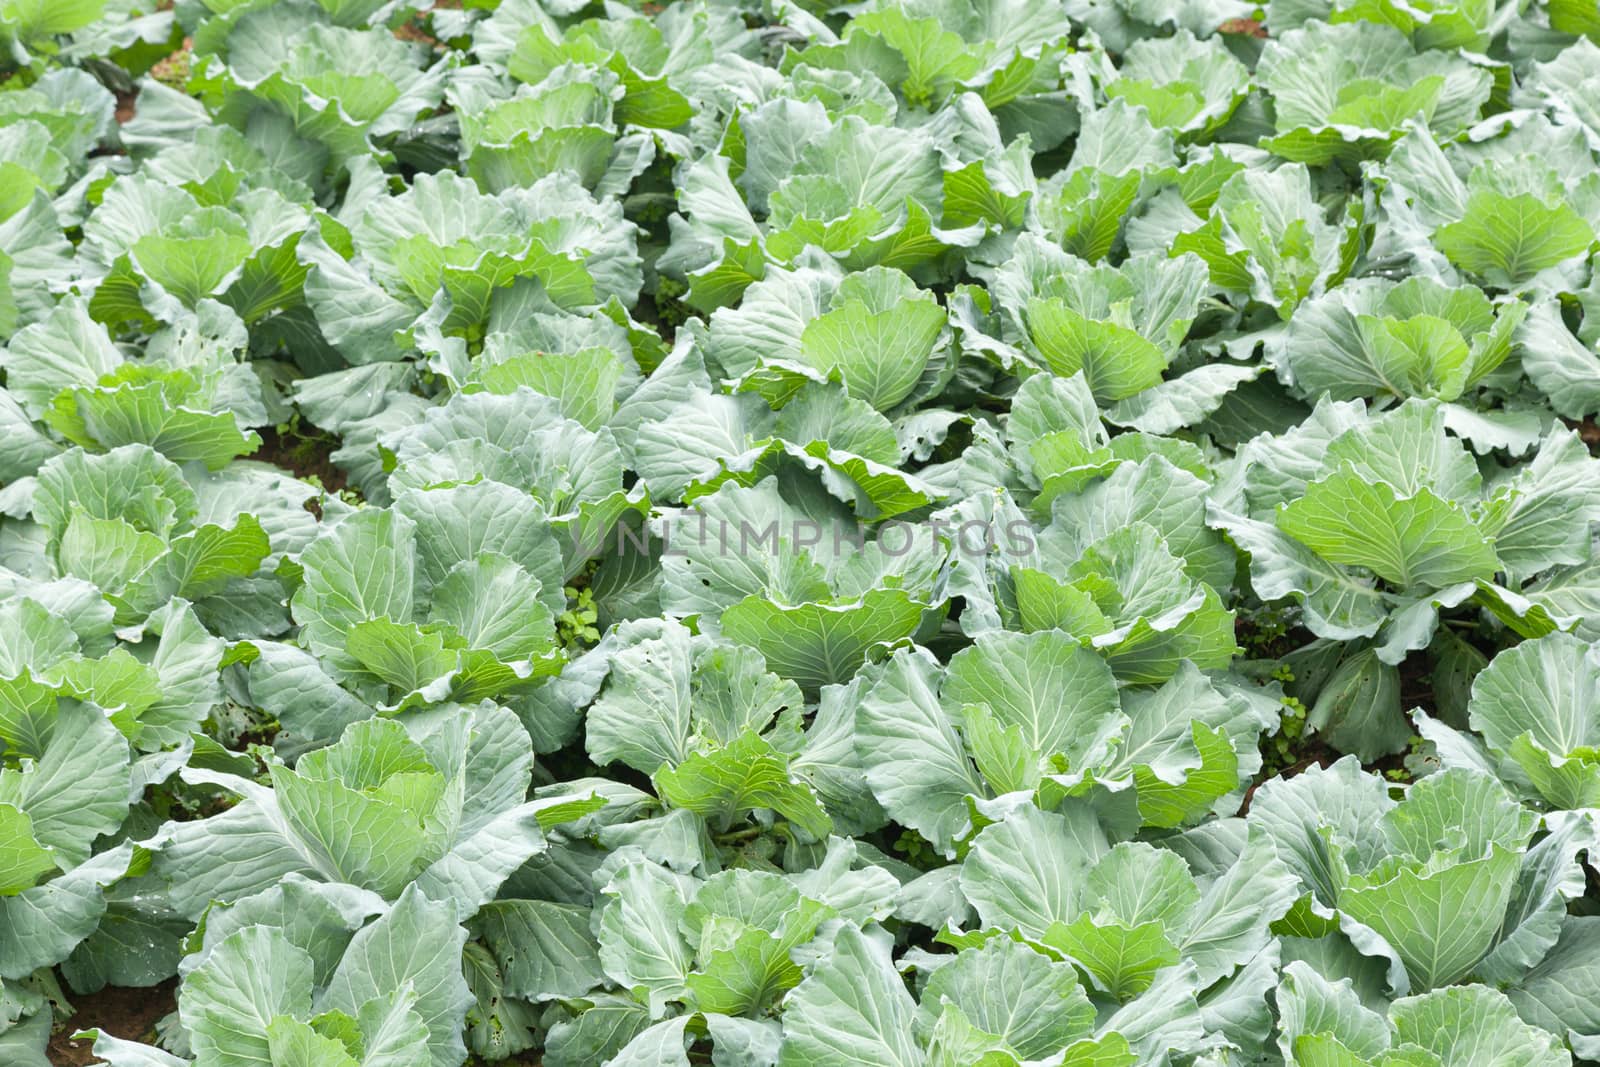 Agriculture cabbage areas planted cabbage big mountain cold.